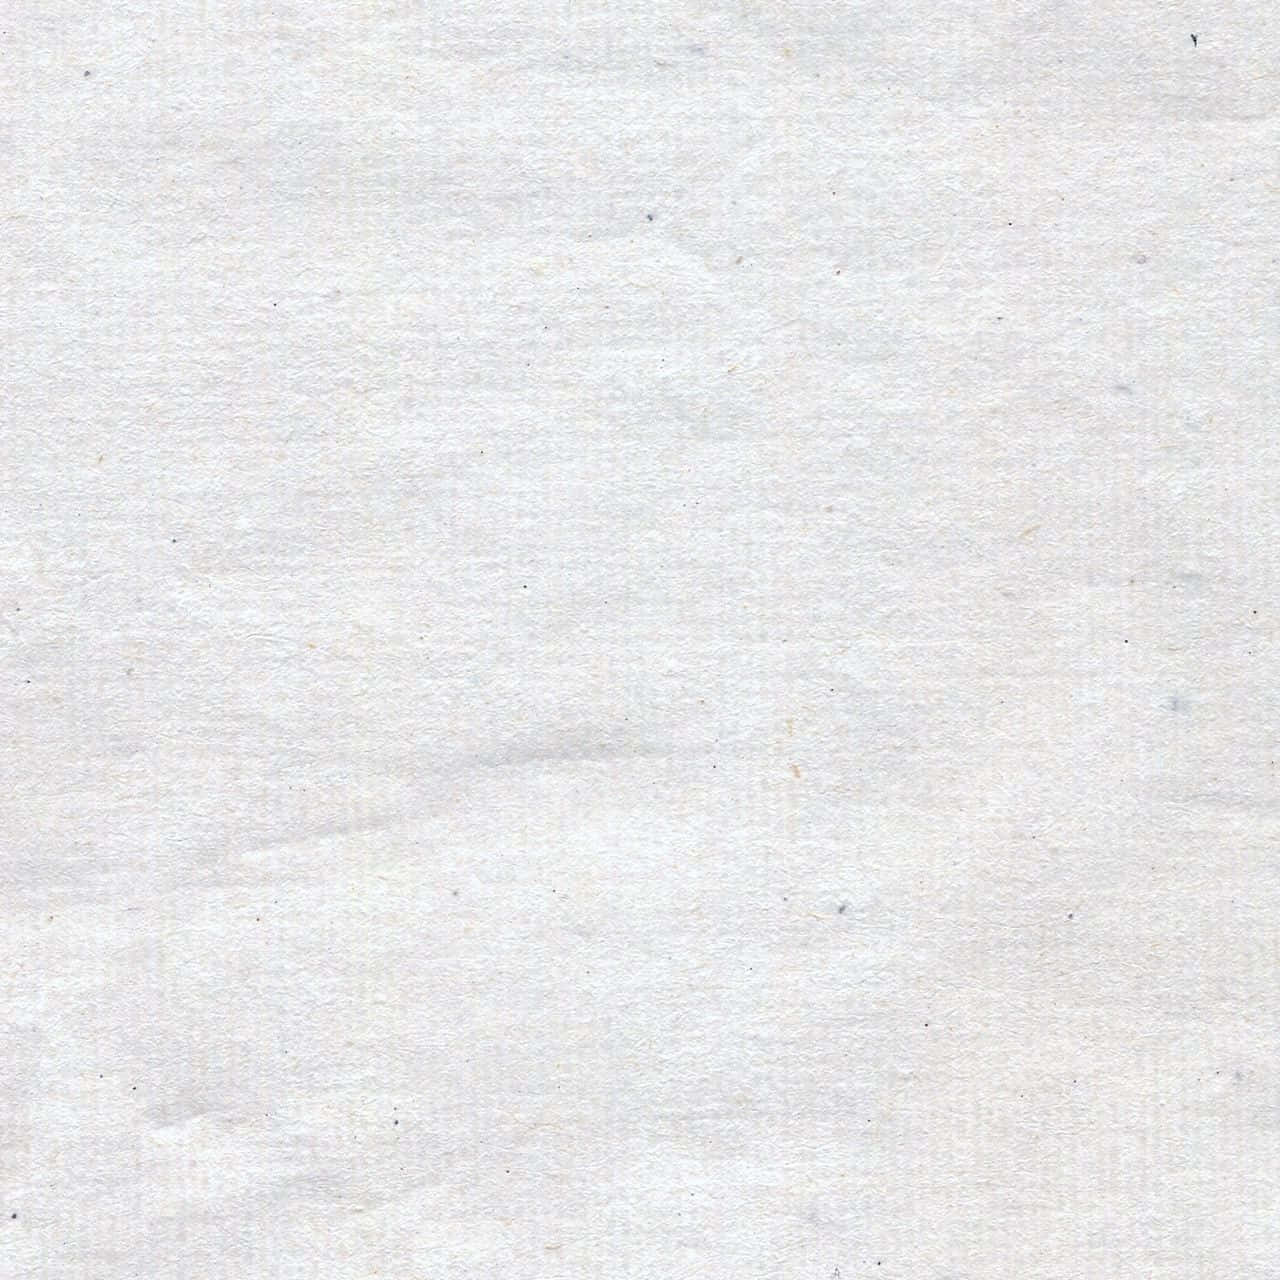 White Paper Texture With A Small Amount Of Dirt Wallpaper